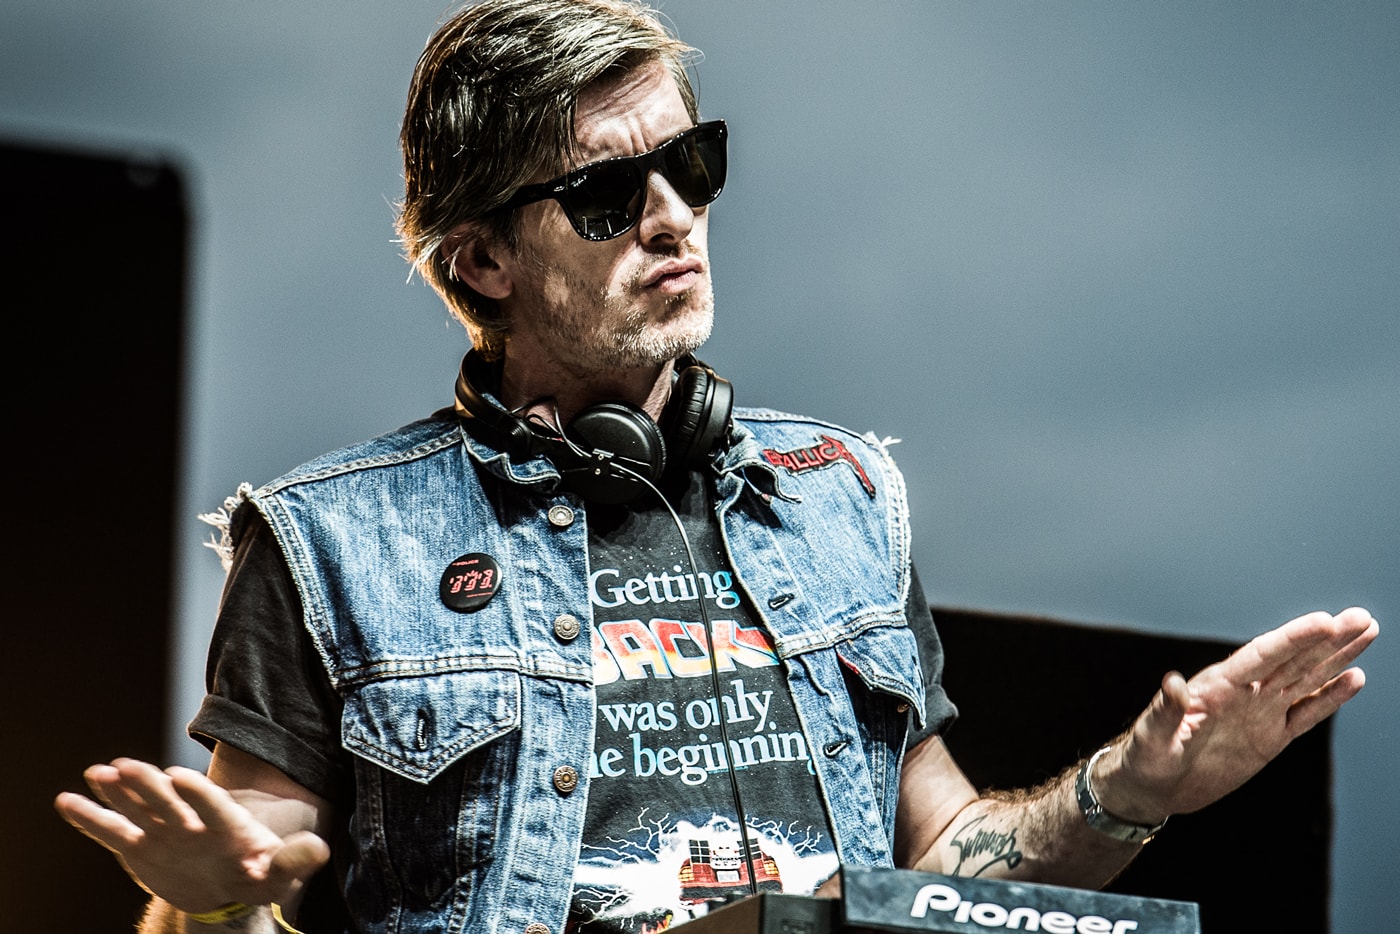 Kavinsky Releases Sequel to Iconic 2010 Song Nightcall: Listen to  Zenith -  - The Latest Electronic Dance Music News, Reviews &  Artists